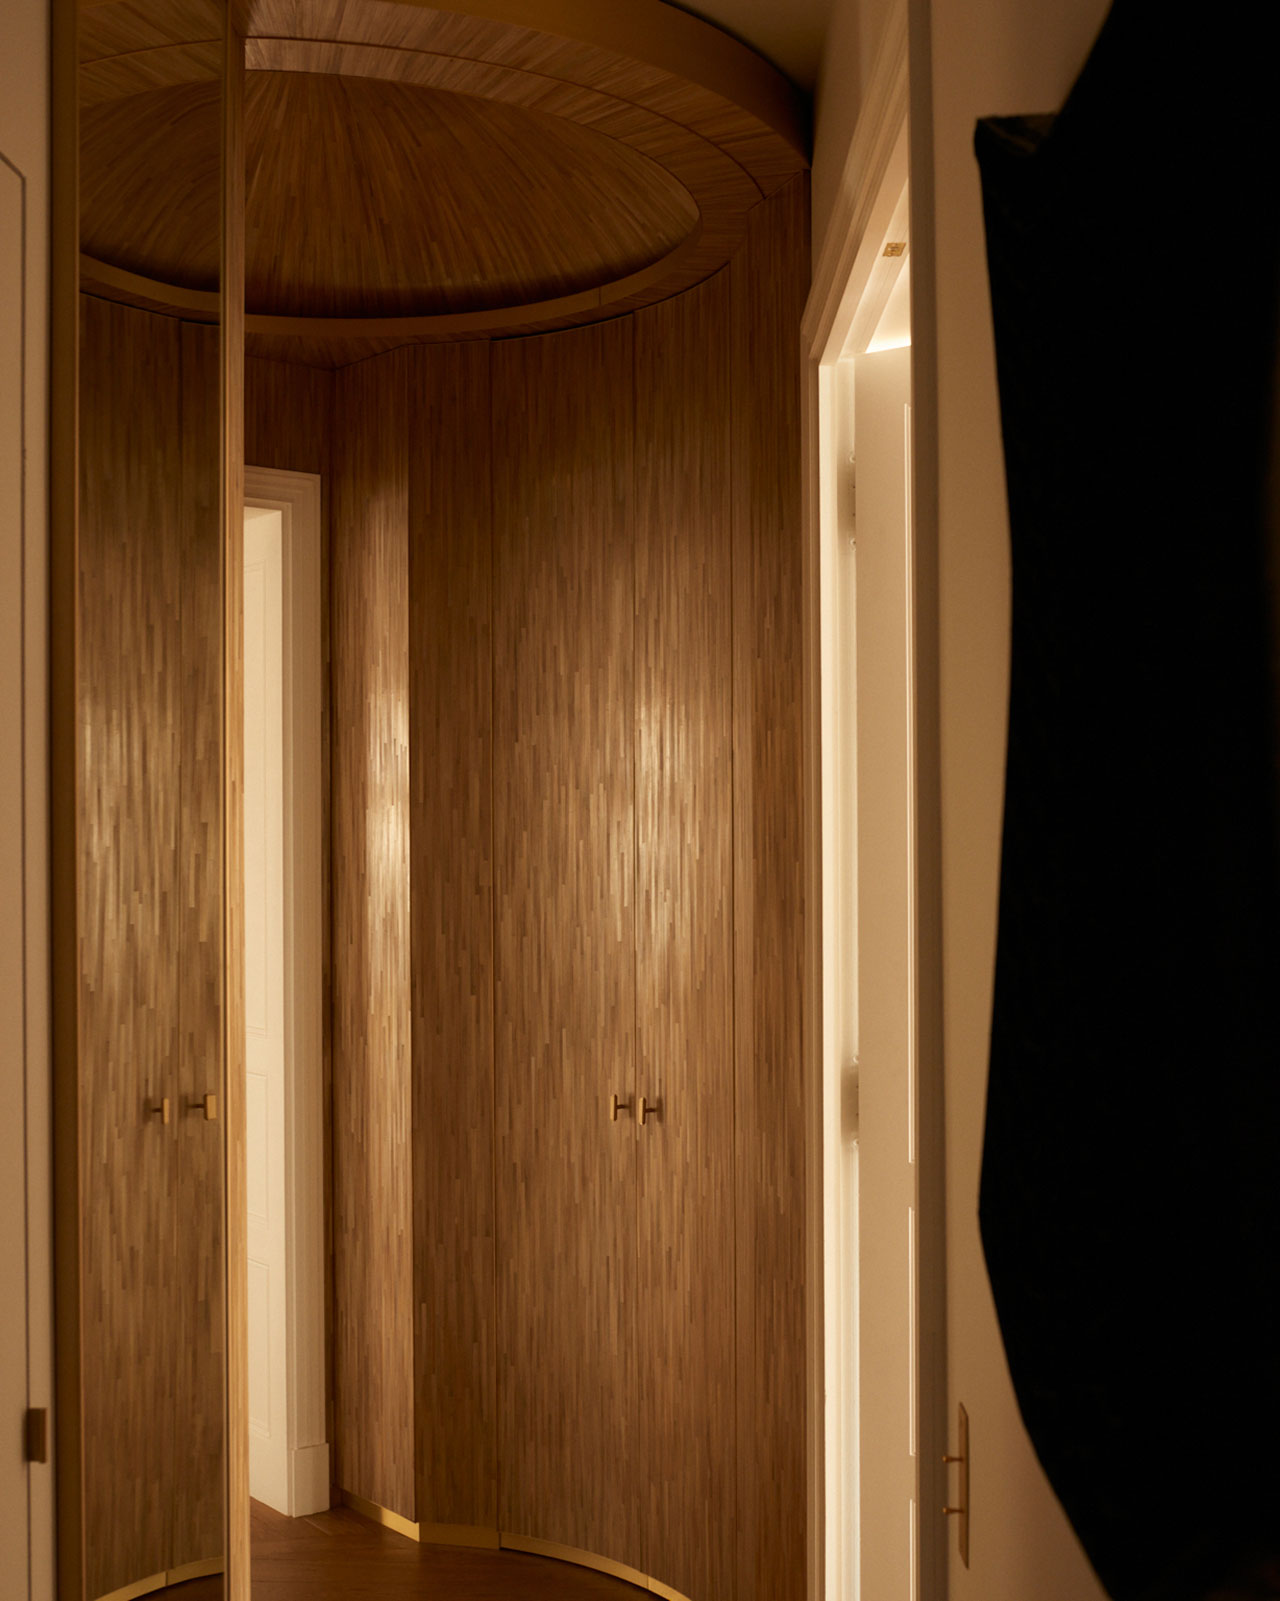 Entrance vestibule clad in straw marquetry by Hauvette &amp; Madani.
Photography by Francois Coquerel.